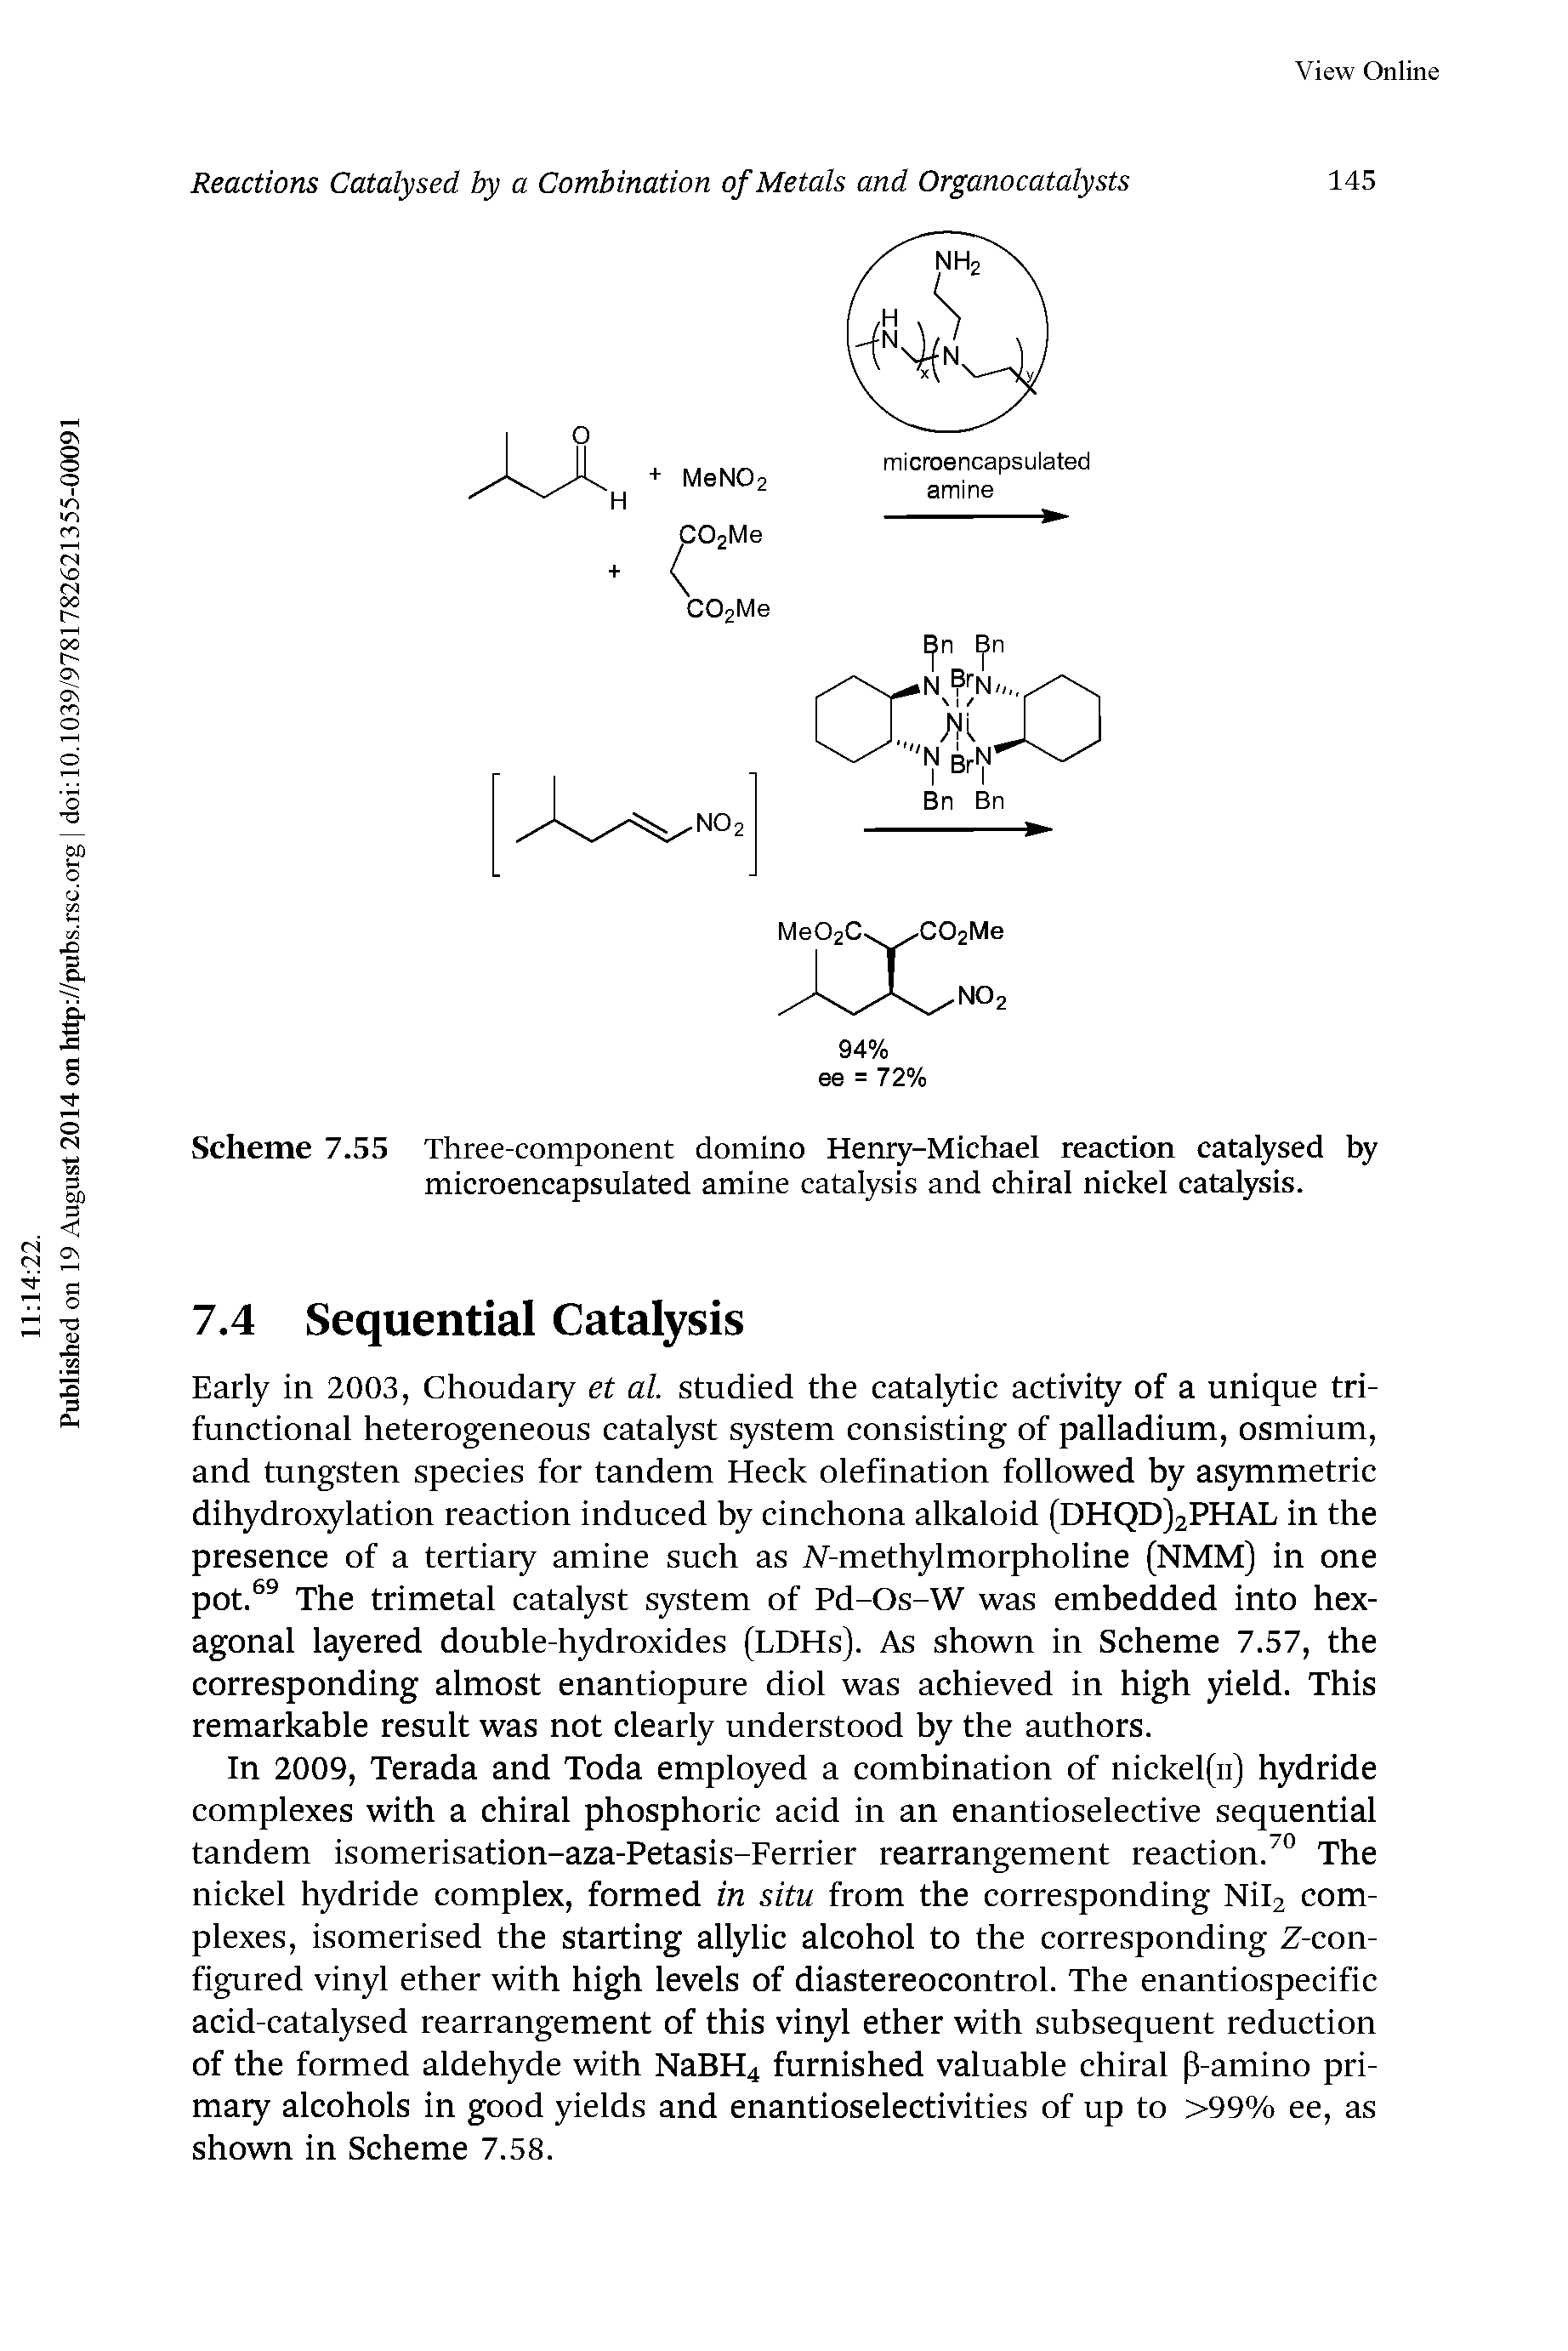 Scheme 7.55 Three-component domino Henry-Michael reaction catalysed by microencapsulated amine catalysis and chiral nickel catatysis.